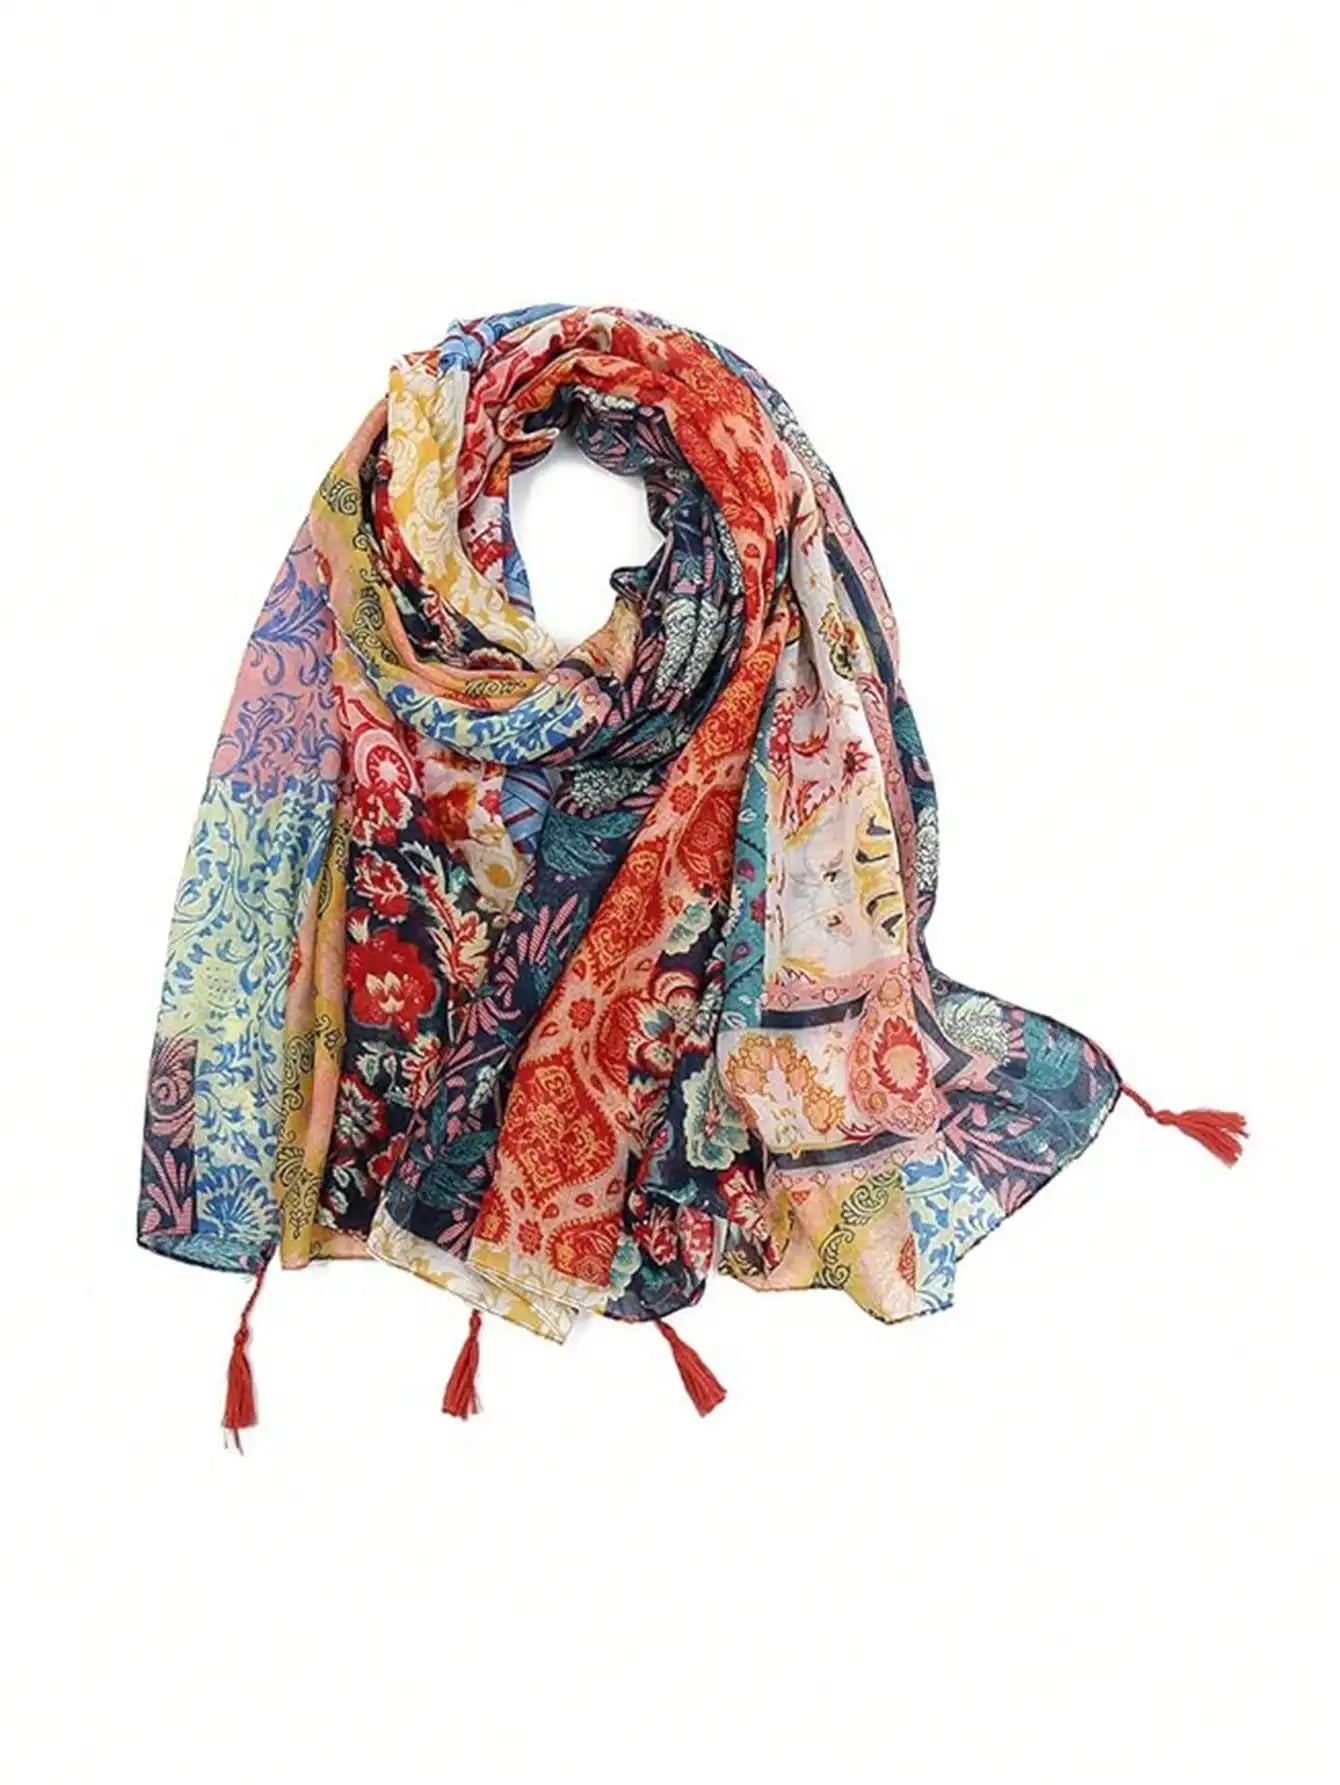 1 piece of women's shawl with Bohemian style scarf, lightweight pure cotton, autumn and winter fashionable floral print tassel s